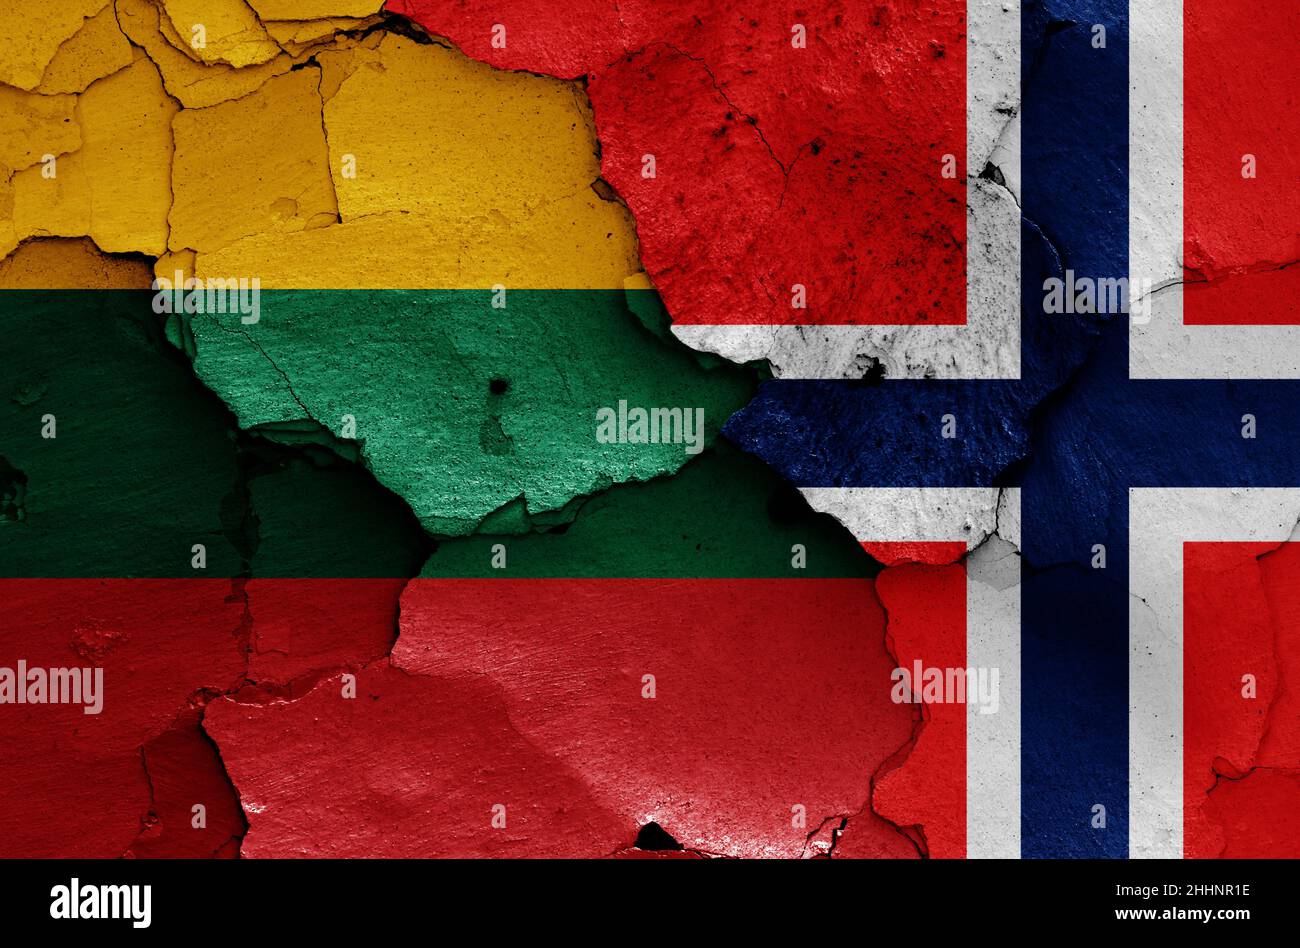 flags of Lithuania and Norway painted on cracked wall Stock Photo